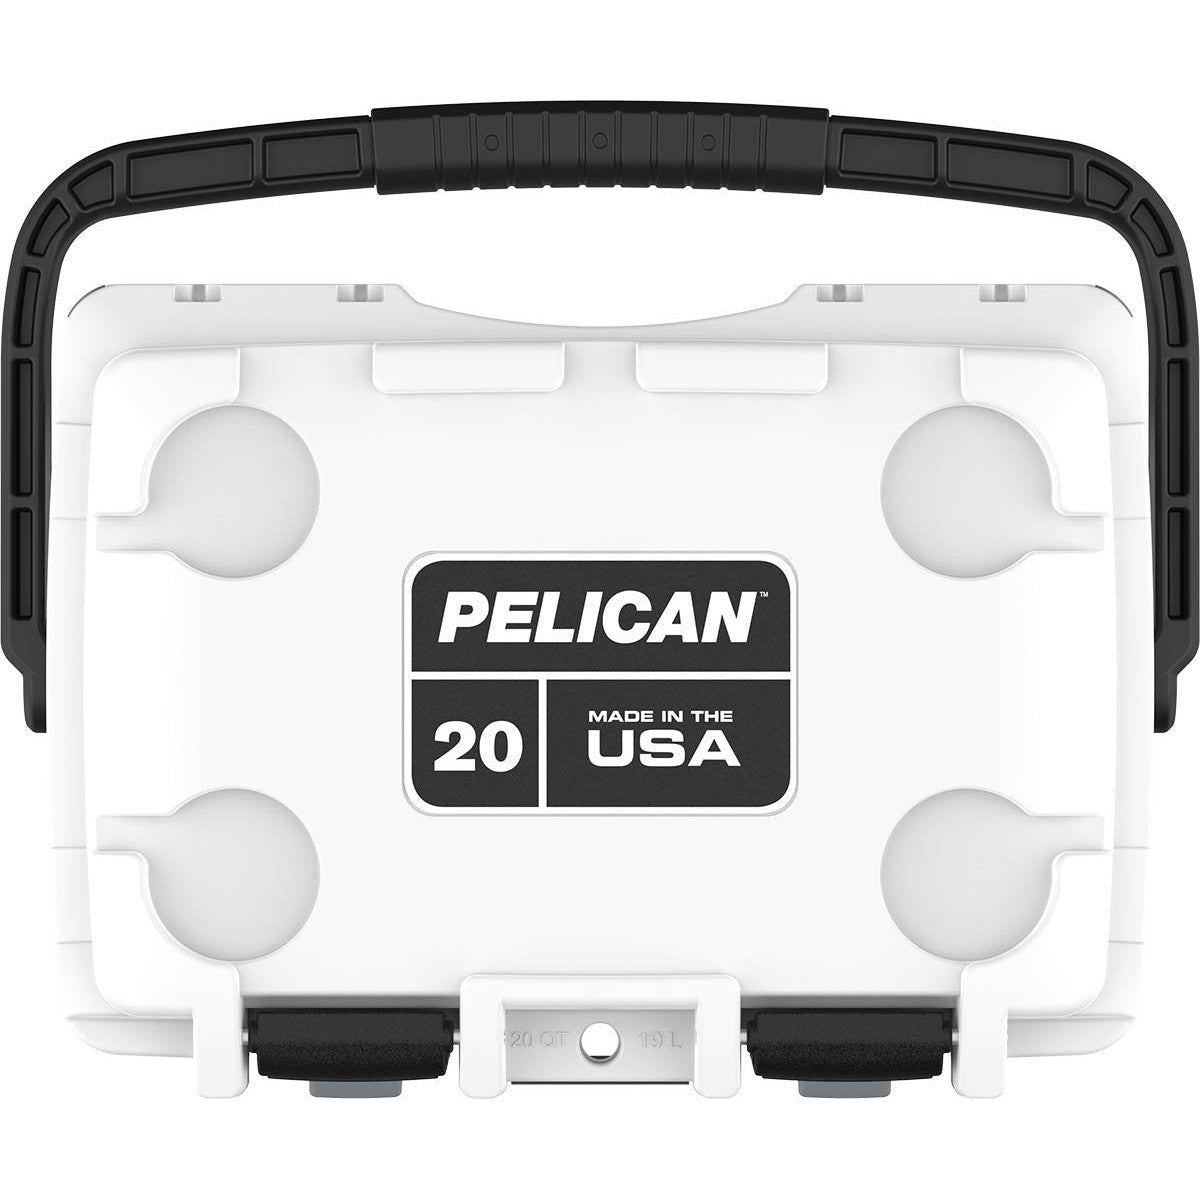 pelican-made-in-usa-coolers-fishing-cooler.jpg